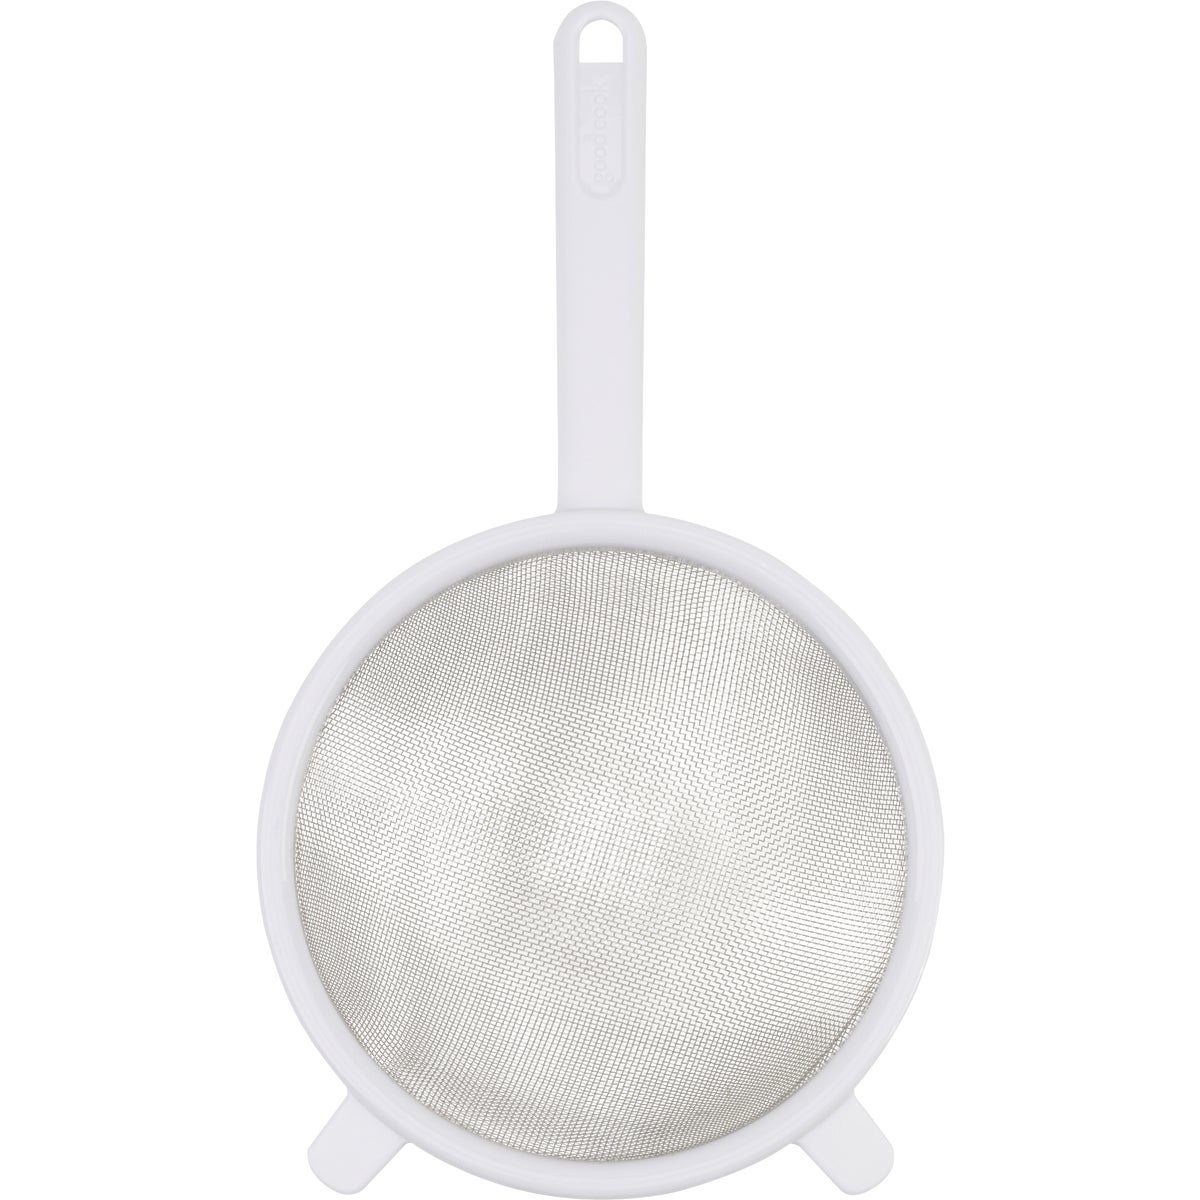 Goodcook 5.5 In. Stainless Steel Mesh Strainer